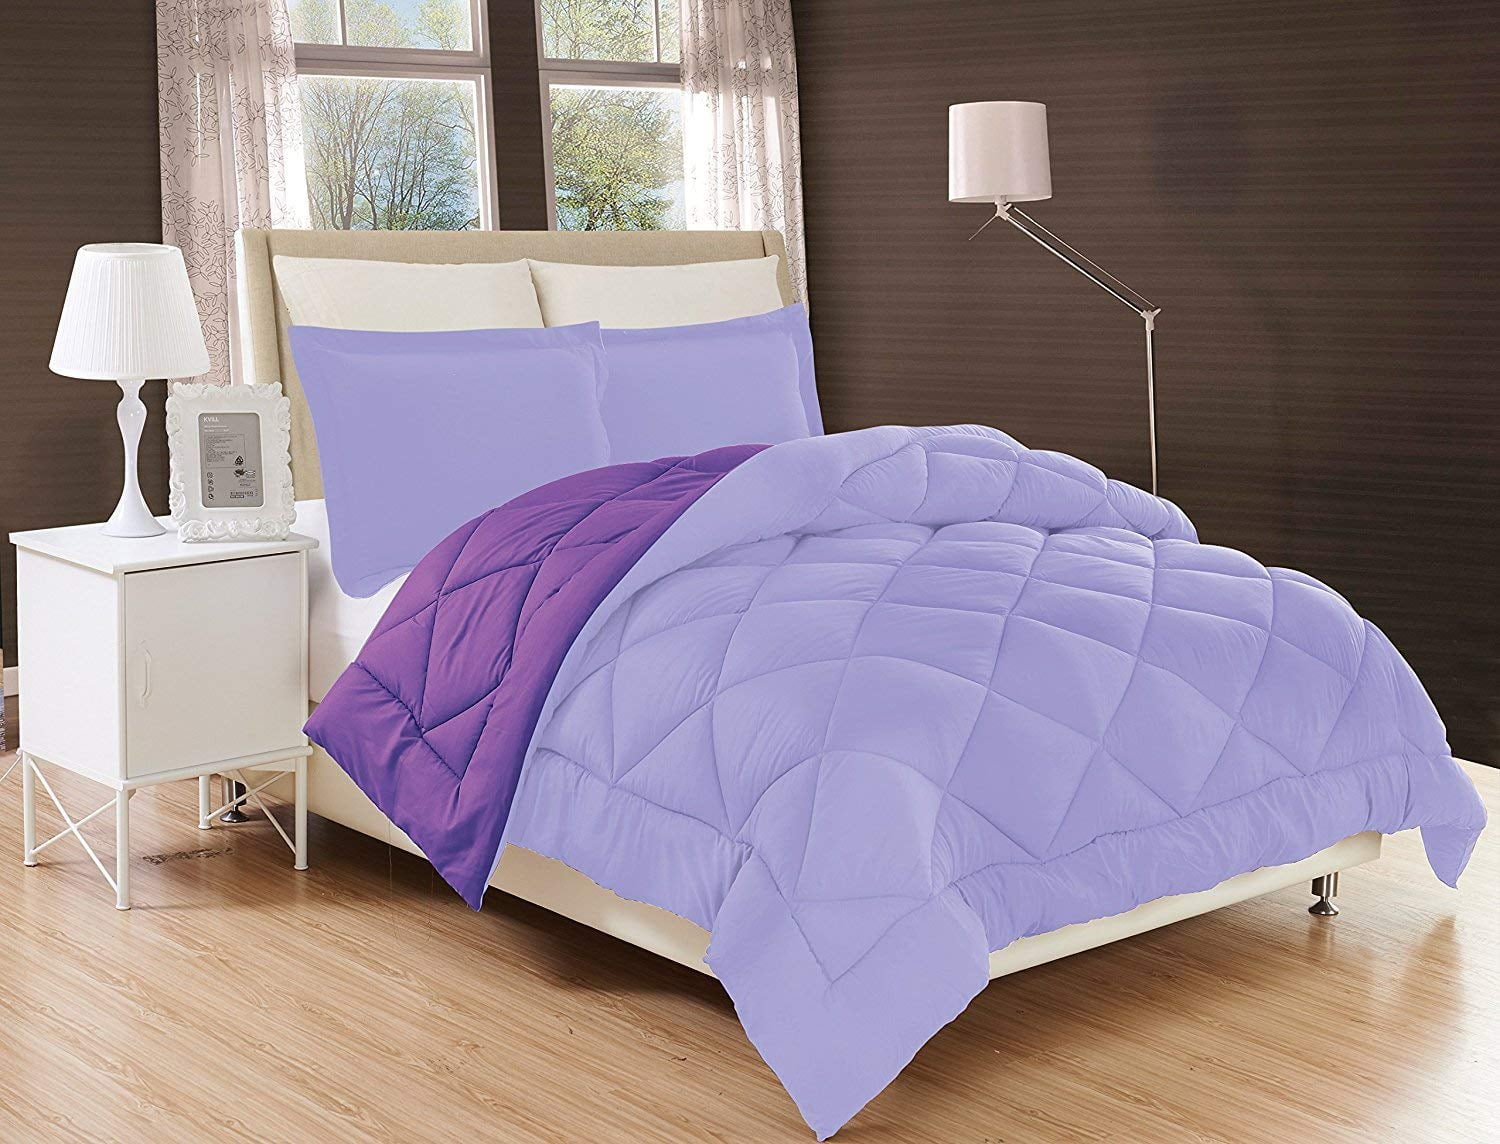 Details about   VEEYOO Comforter Set King Size All Season Soft Quilted Down Alternative Duvet 